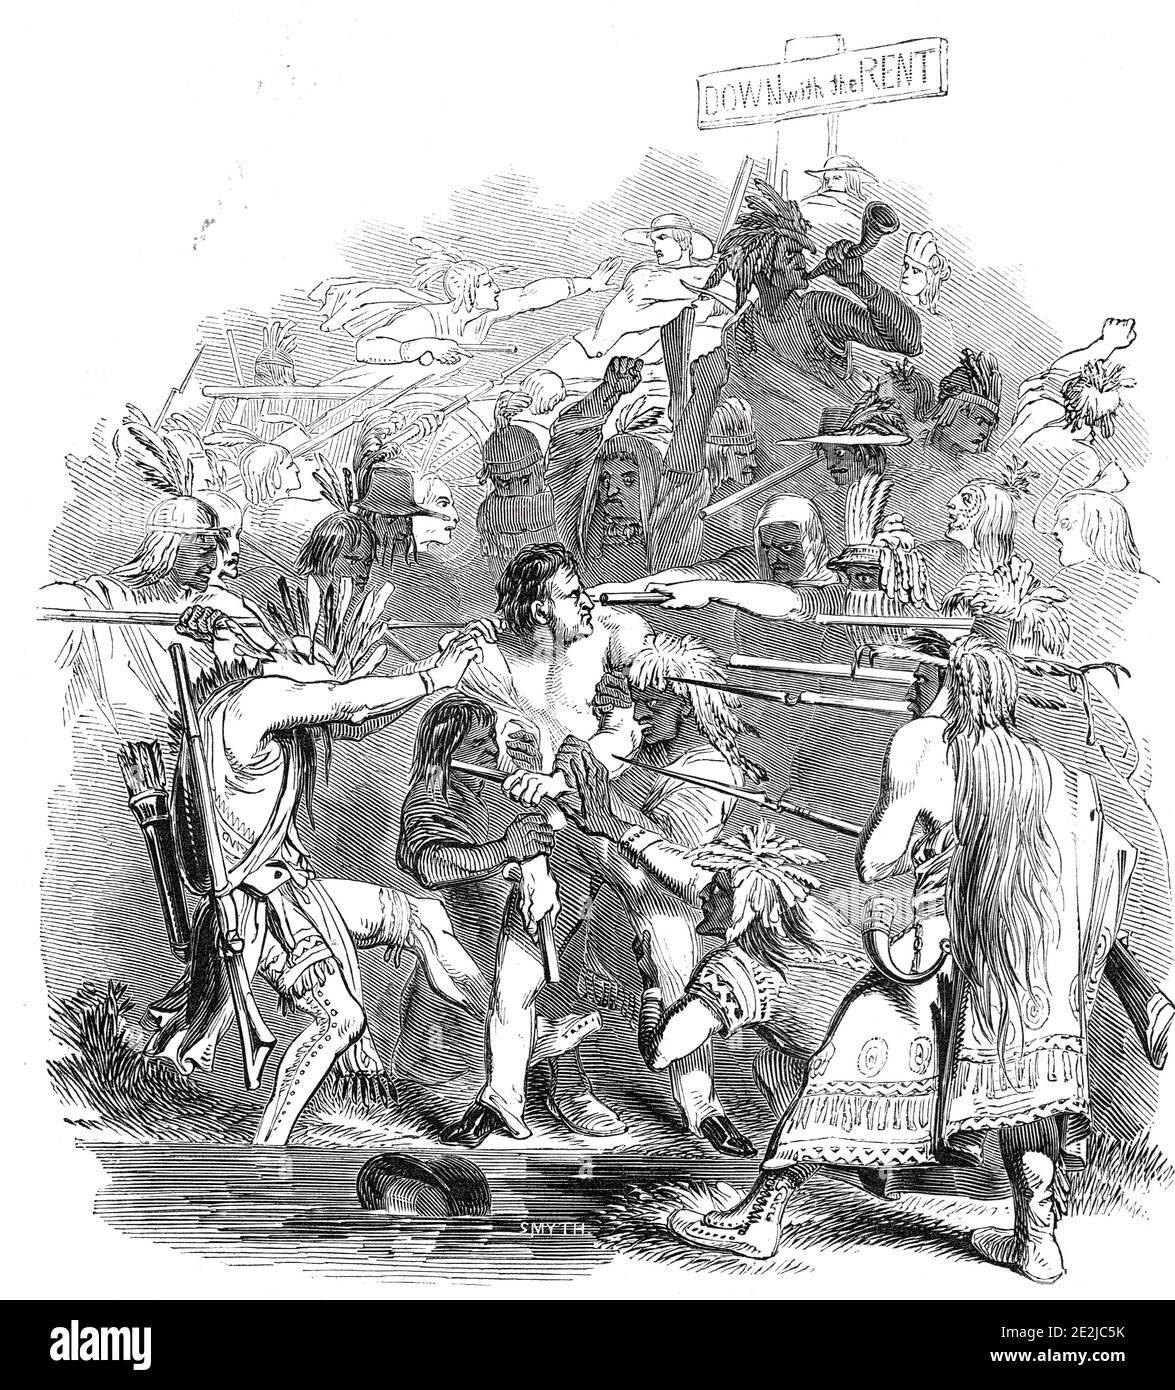 Anti-rent insurrection - attack on the Sheriff of Albany, 1844. White settlers demand payment from indigenous Americans, with consequences: '...the Sheriff himself was held down in a ditch, and pistols were pointed at his head, and he was threatened with death, unless he gave up his papers, to which he replied, &quot;Shoot away; I never will give up while I am alive&quot;. The Indians then proceeded to tar and feather the Sheriff, but without making any impression on the indomitable temper ol the Sheriff, who, on being asked by an Indian, who was holding a pistol at his head, what he would do Stock Photo